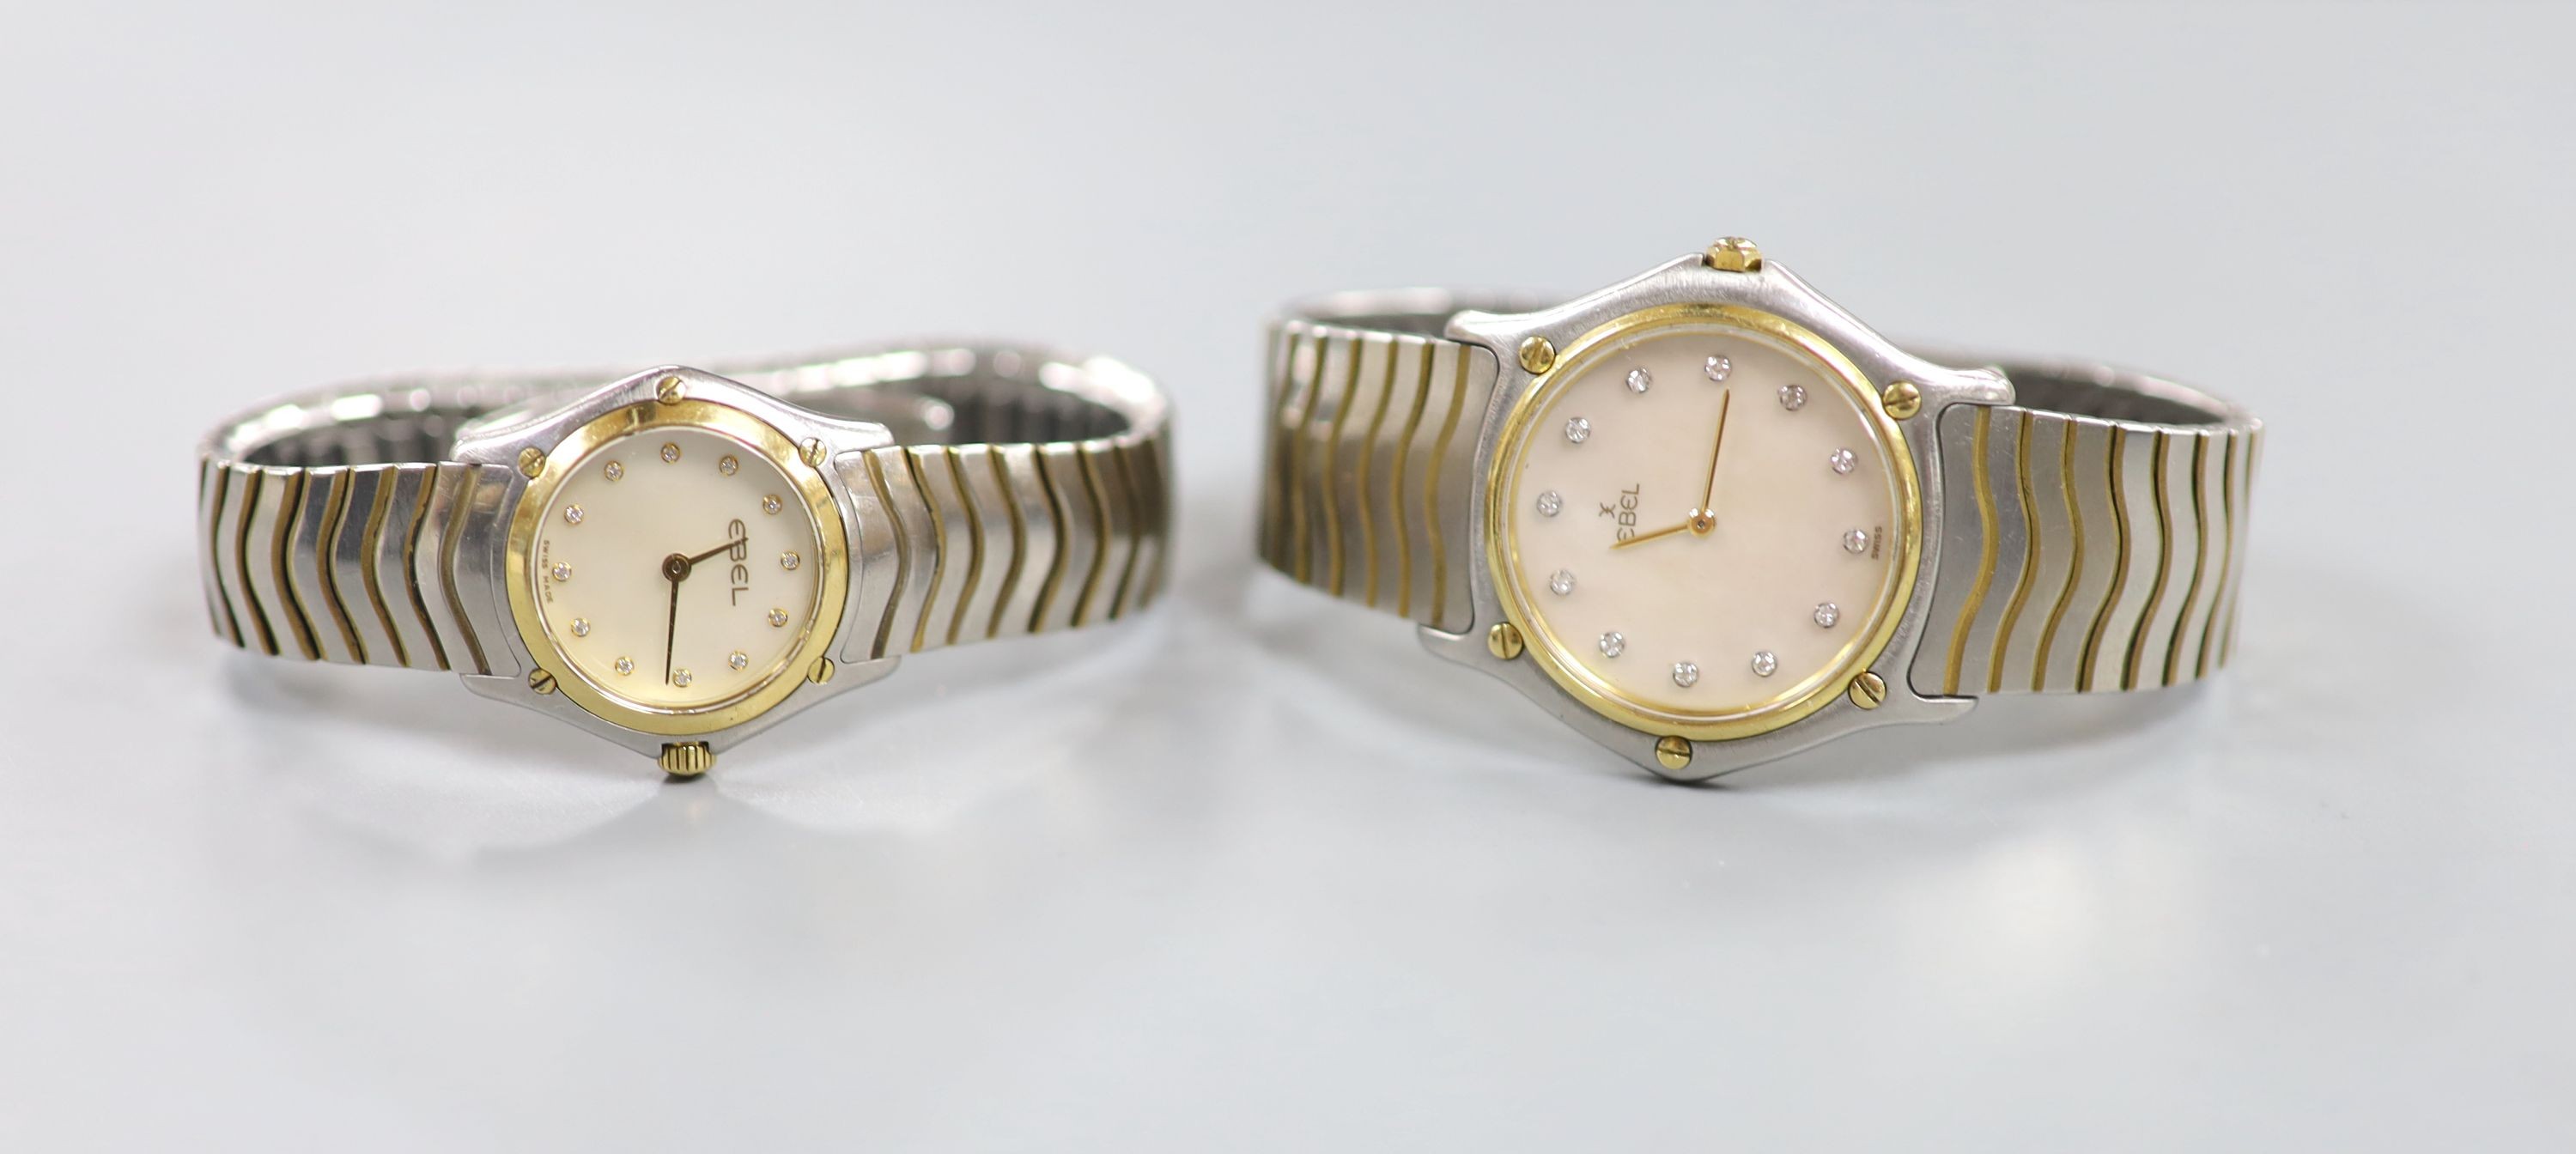 A lady's and gentleman's stainless steel and gold plated Ebel quartz wrist watches, with mother of pearl dials and diamond dot markers, case diameters 32mm and 23mm, no boxes.